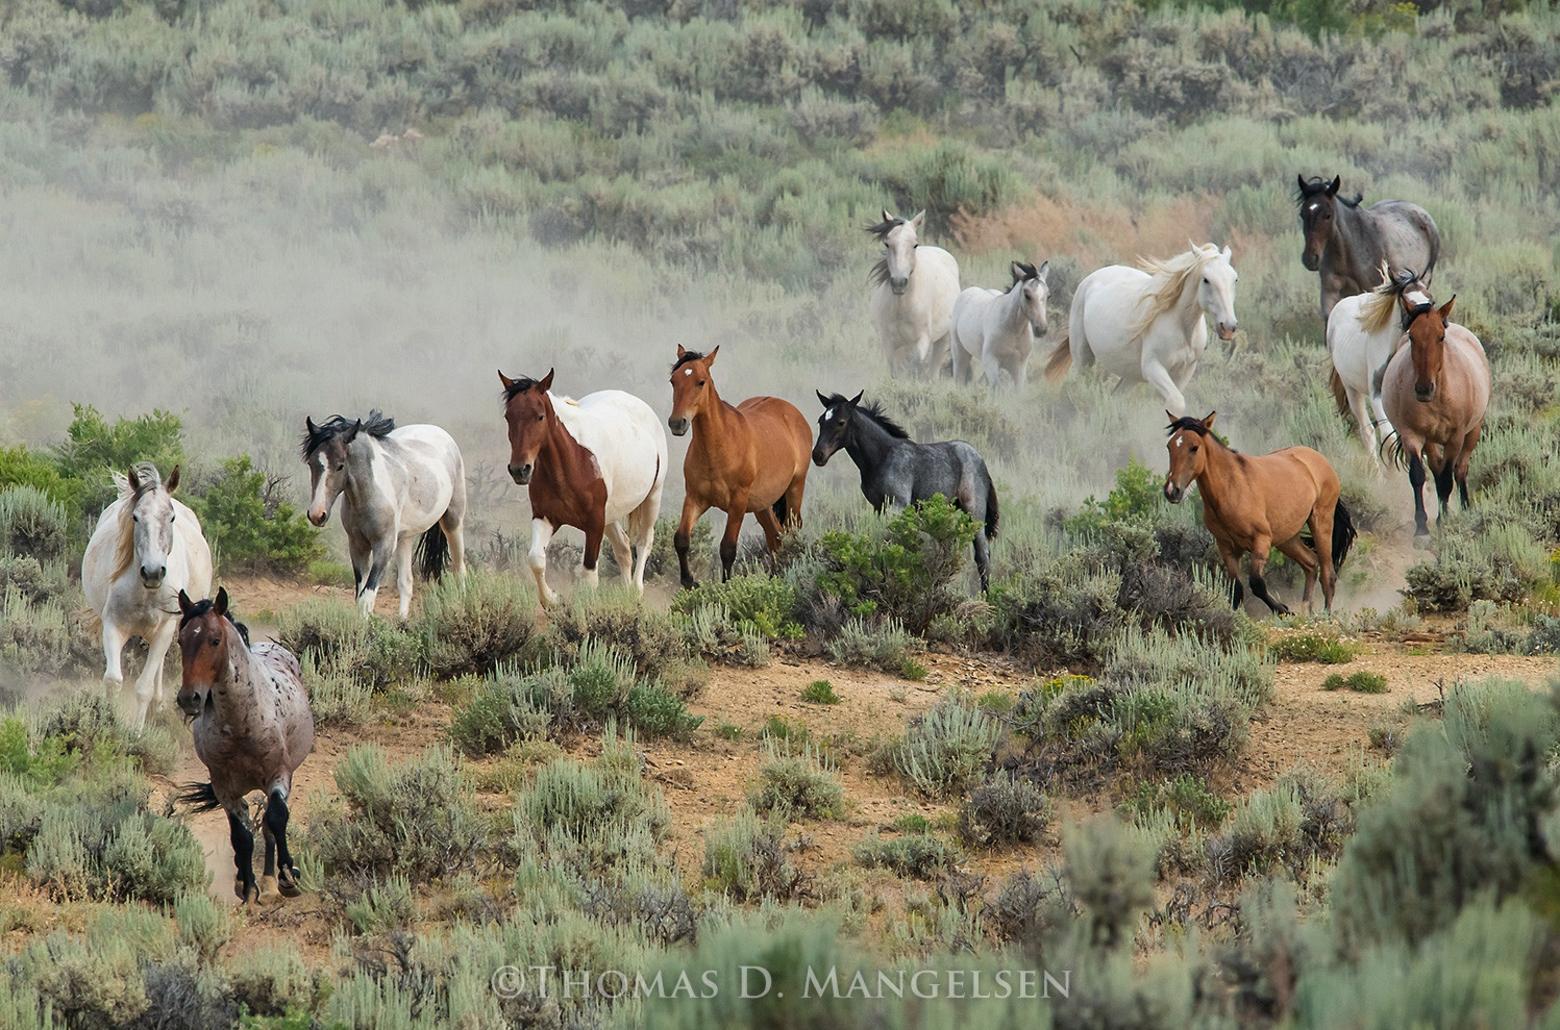 "High Desert Drifters," photograph by Thomas D. Mangelsen, all rights reserved. The image is of a wild horse herd in northwest Colorado. To see more of Mangelsen's collectible photographs go to Mangelsen.com